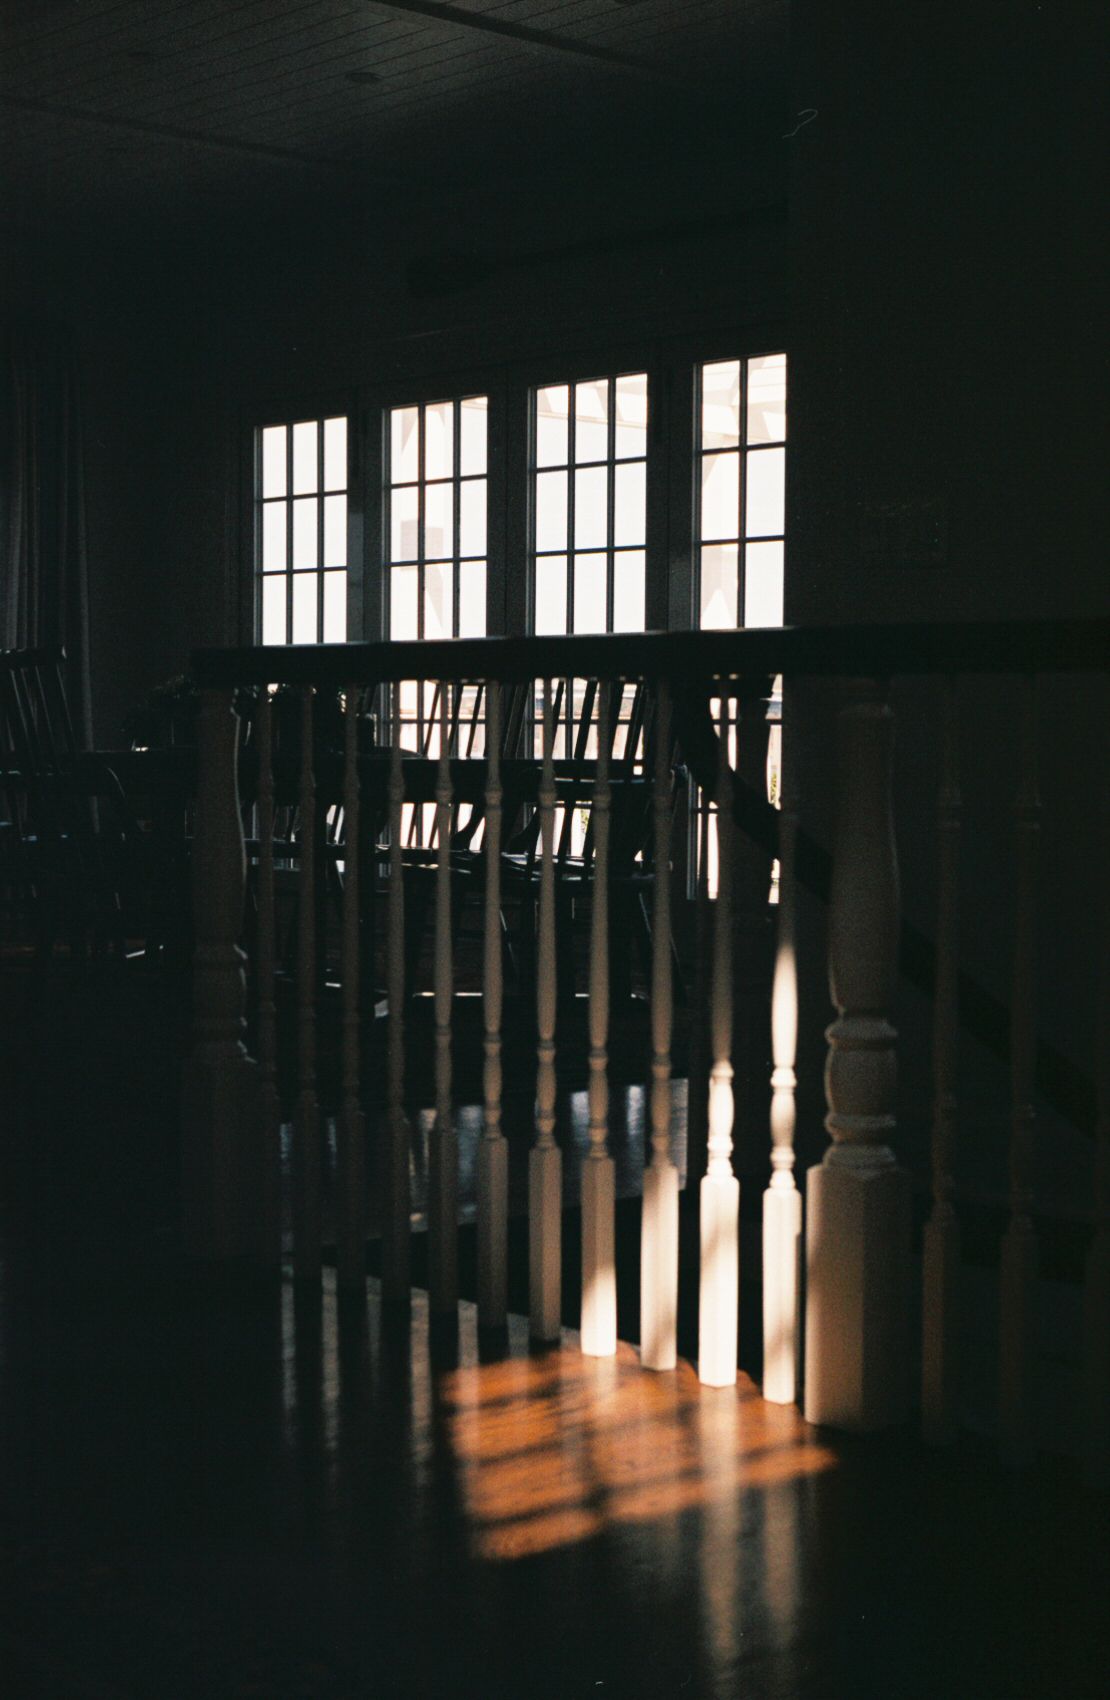 35mm film photograph of light shining through window onto wooden floor and staircase handrail.